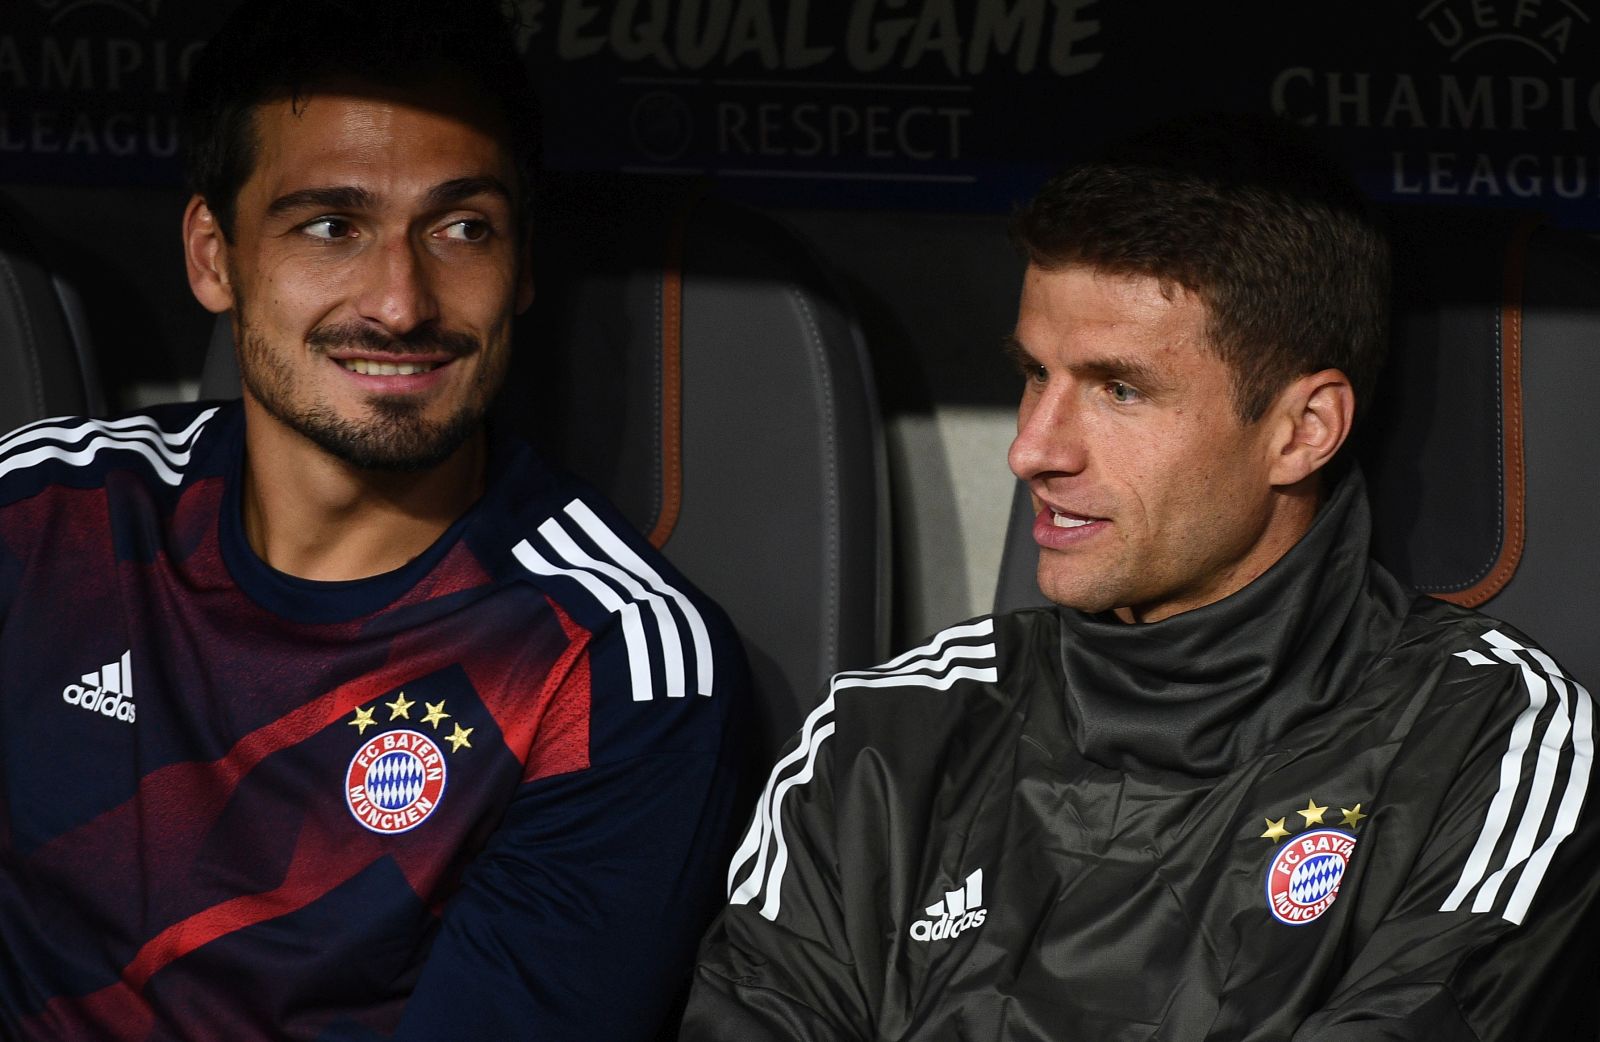 epa09211339 (FILE) - Bayern's Mats Hummels (L) and Thomas Mueller prior to their UEFA Champions League group B match between FC Bayern Munich and RSC Anderlecht in Munich, Germany, 12 September 2017  (re-issued 19 May 2021). The coach of the German national team Joachim Loew announced 19 May 2021 that Mueller and Hummels, who were both dropped from the national team in 2019, are back in the squad for the EURO 2020 starting on 11 June.  EPA/CHRISTIAN BRUNA